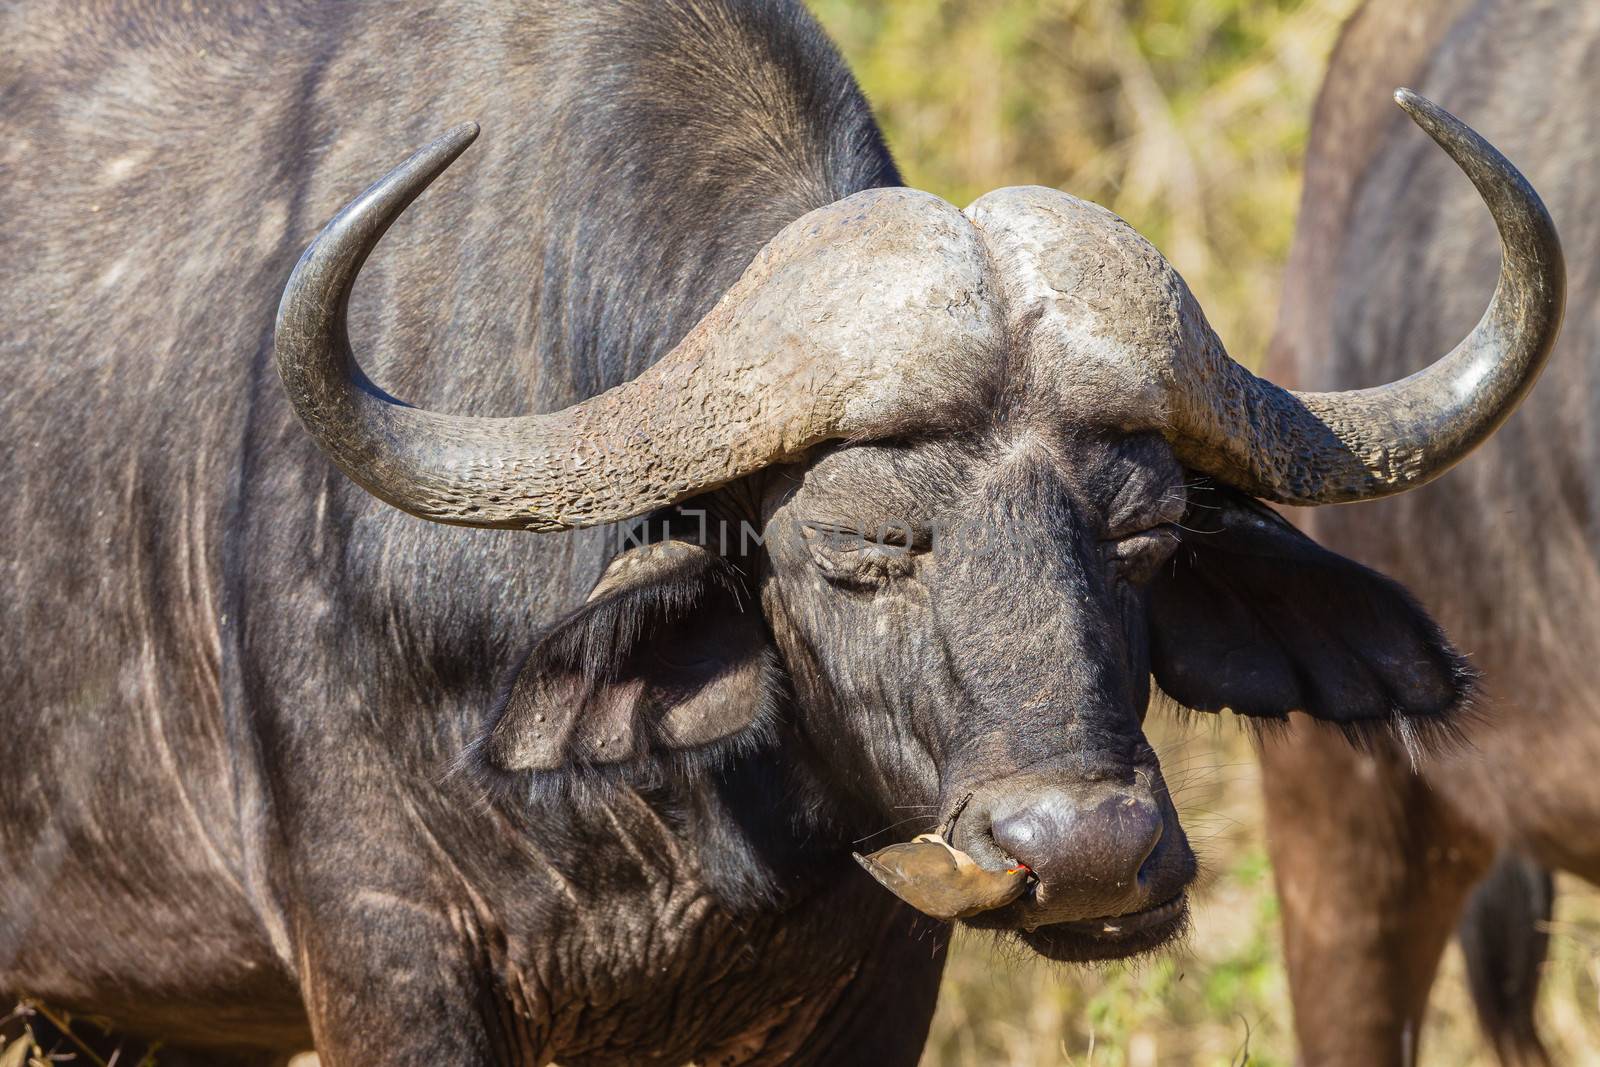 Red-billed ox-pecker bird up nose of wildlife buffalo cleaning ticks and fleas off animal.